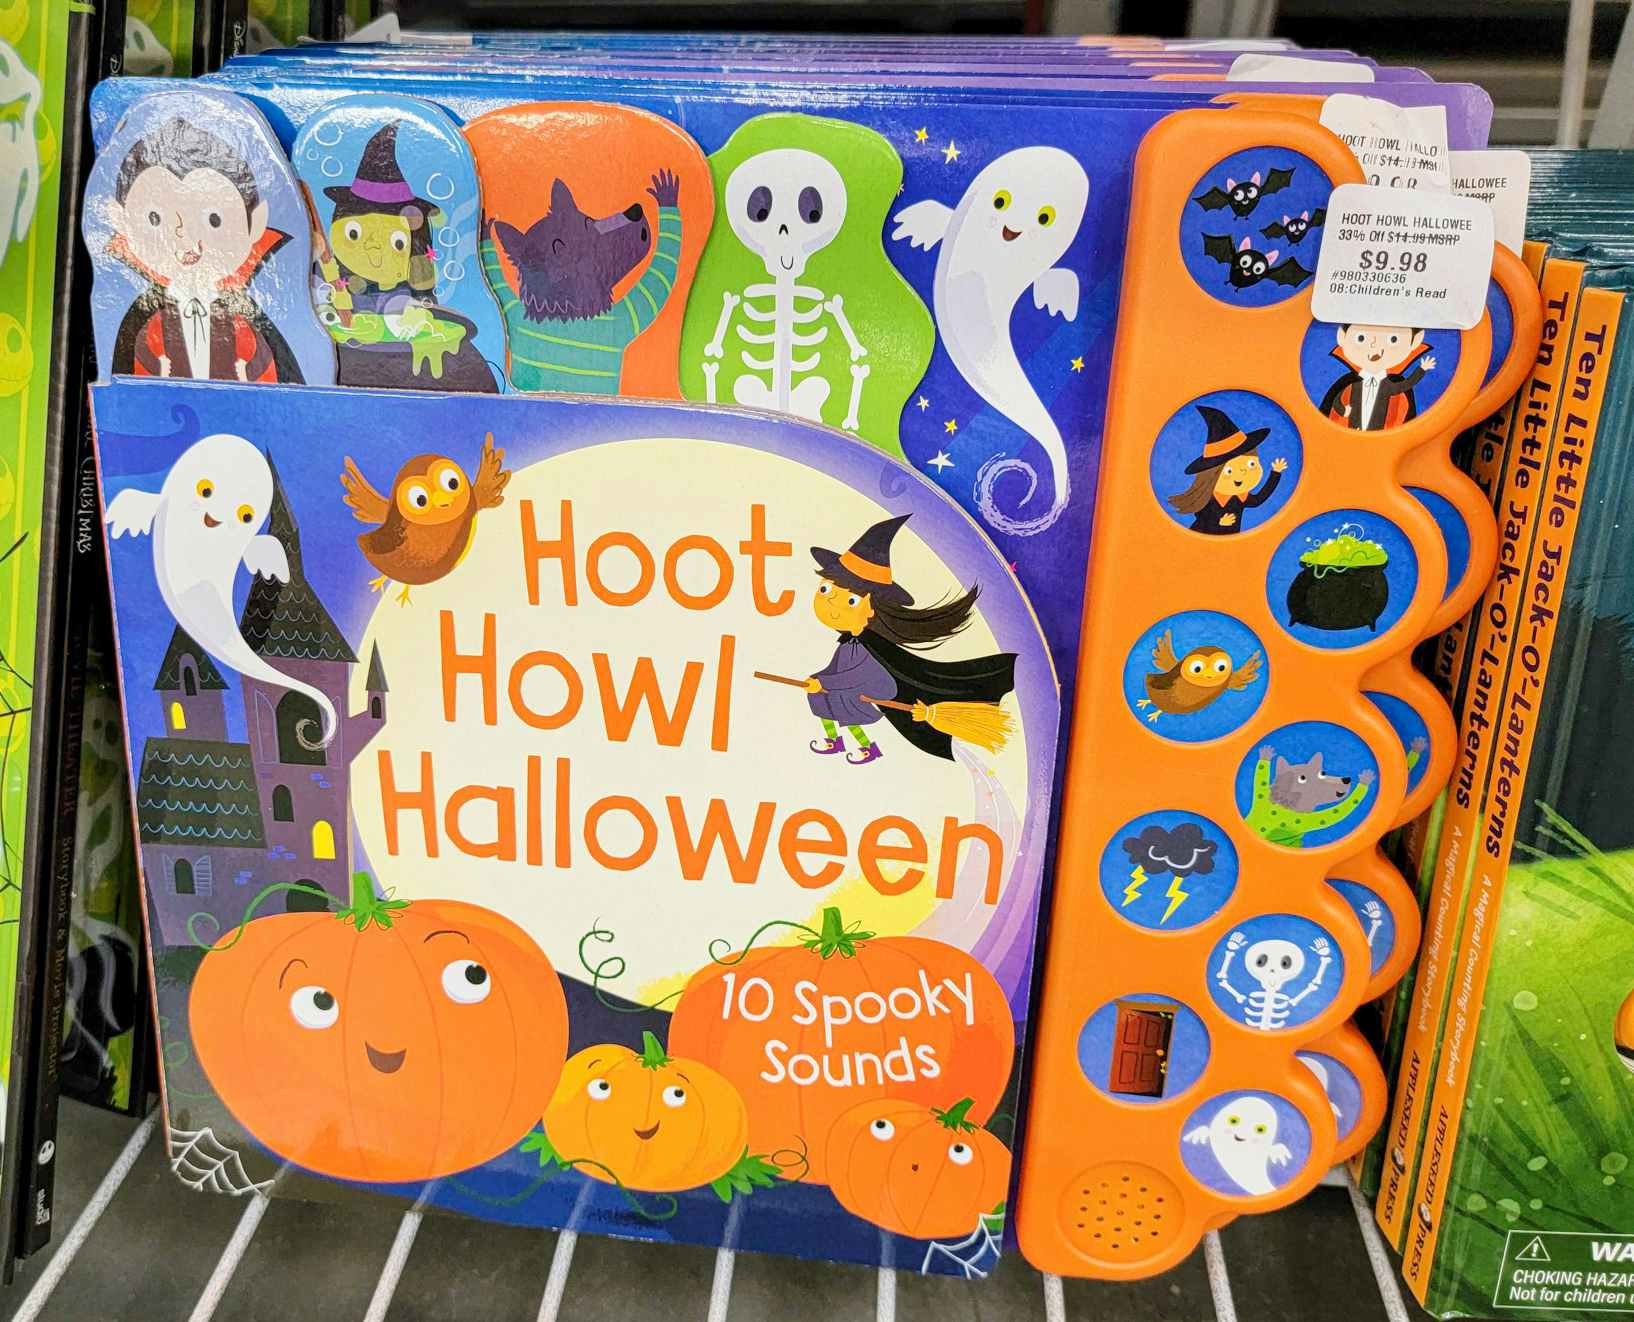 hoot howl halloween book with sounds